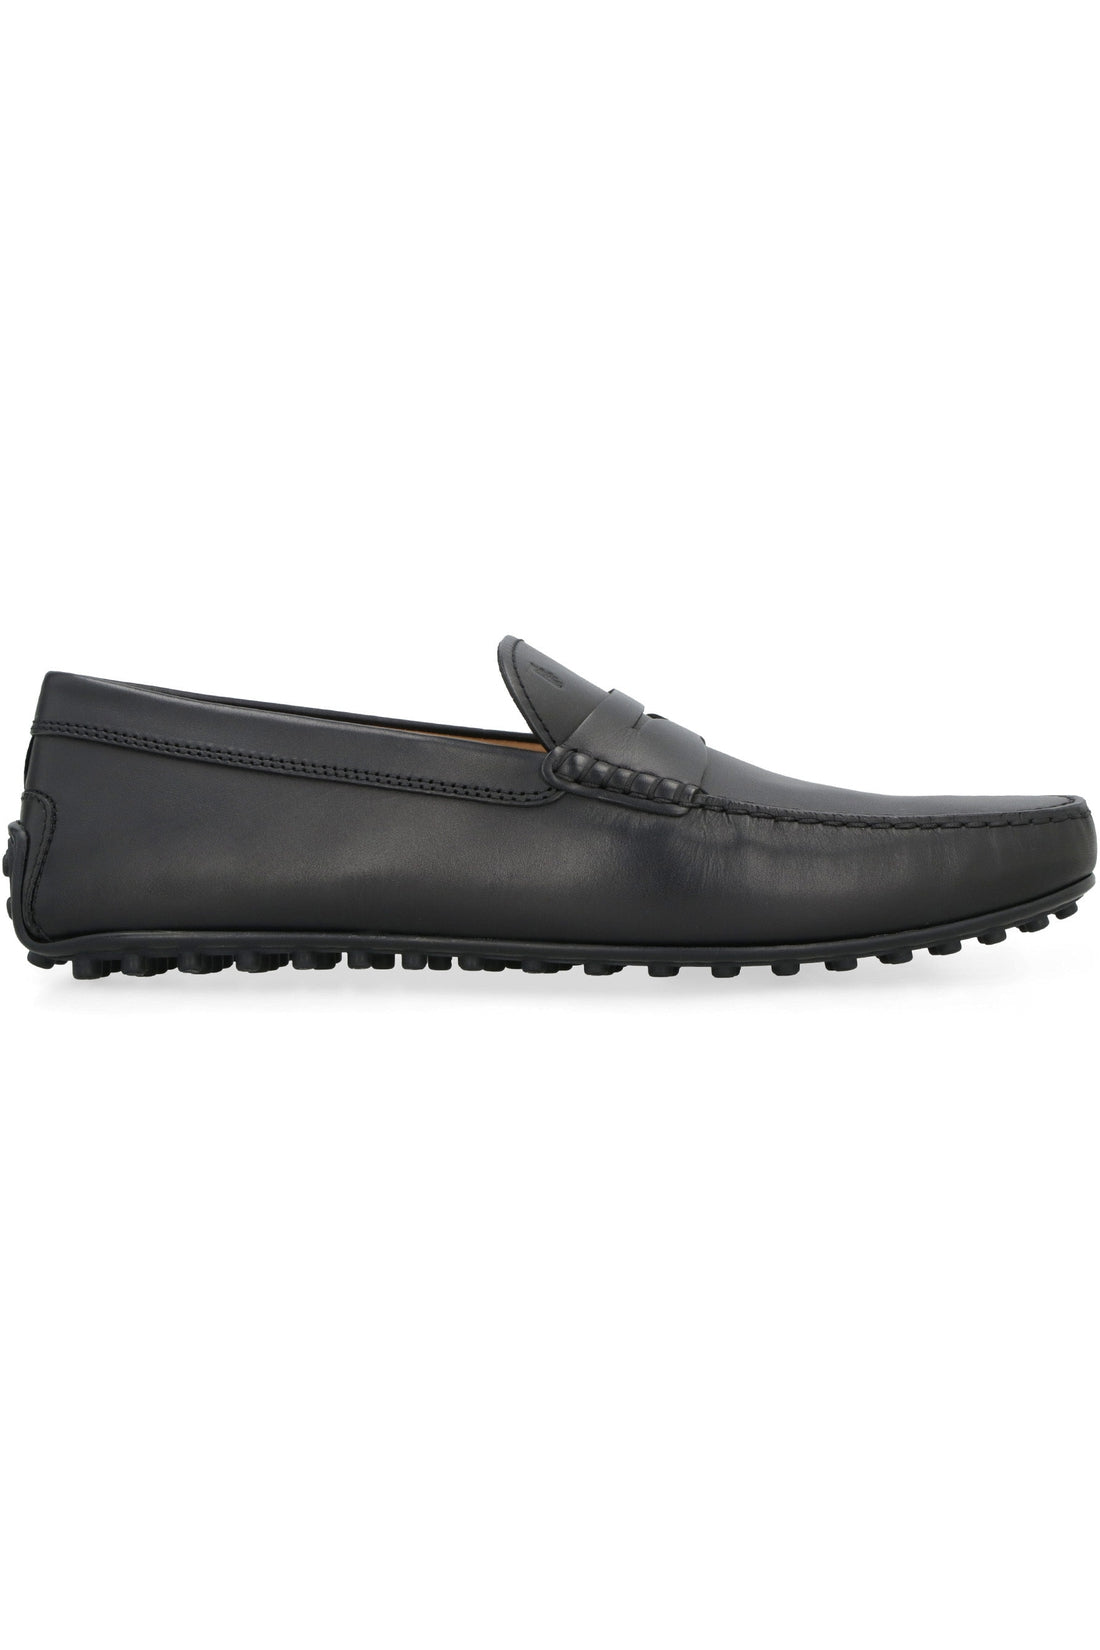 Tod's-OUTLET-SALE-City leather loafers-ARCHIVIST